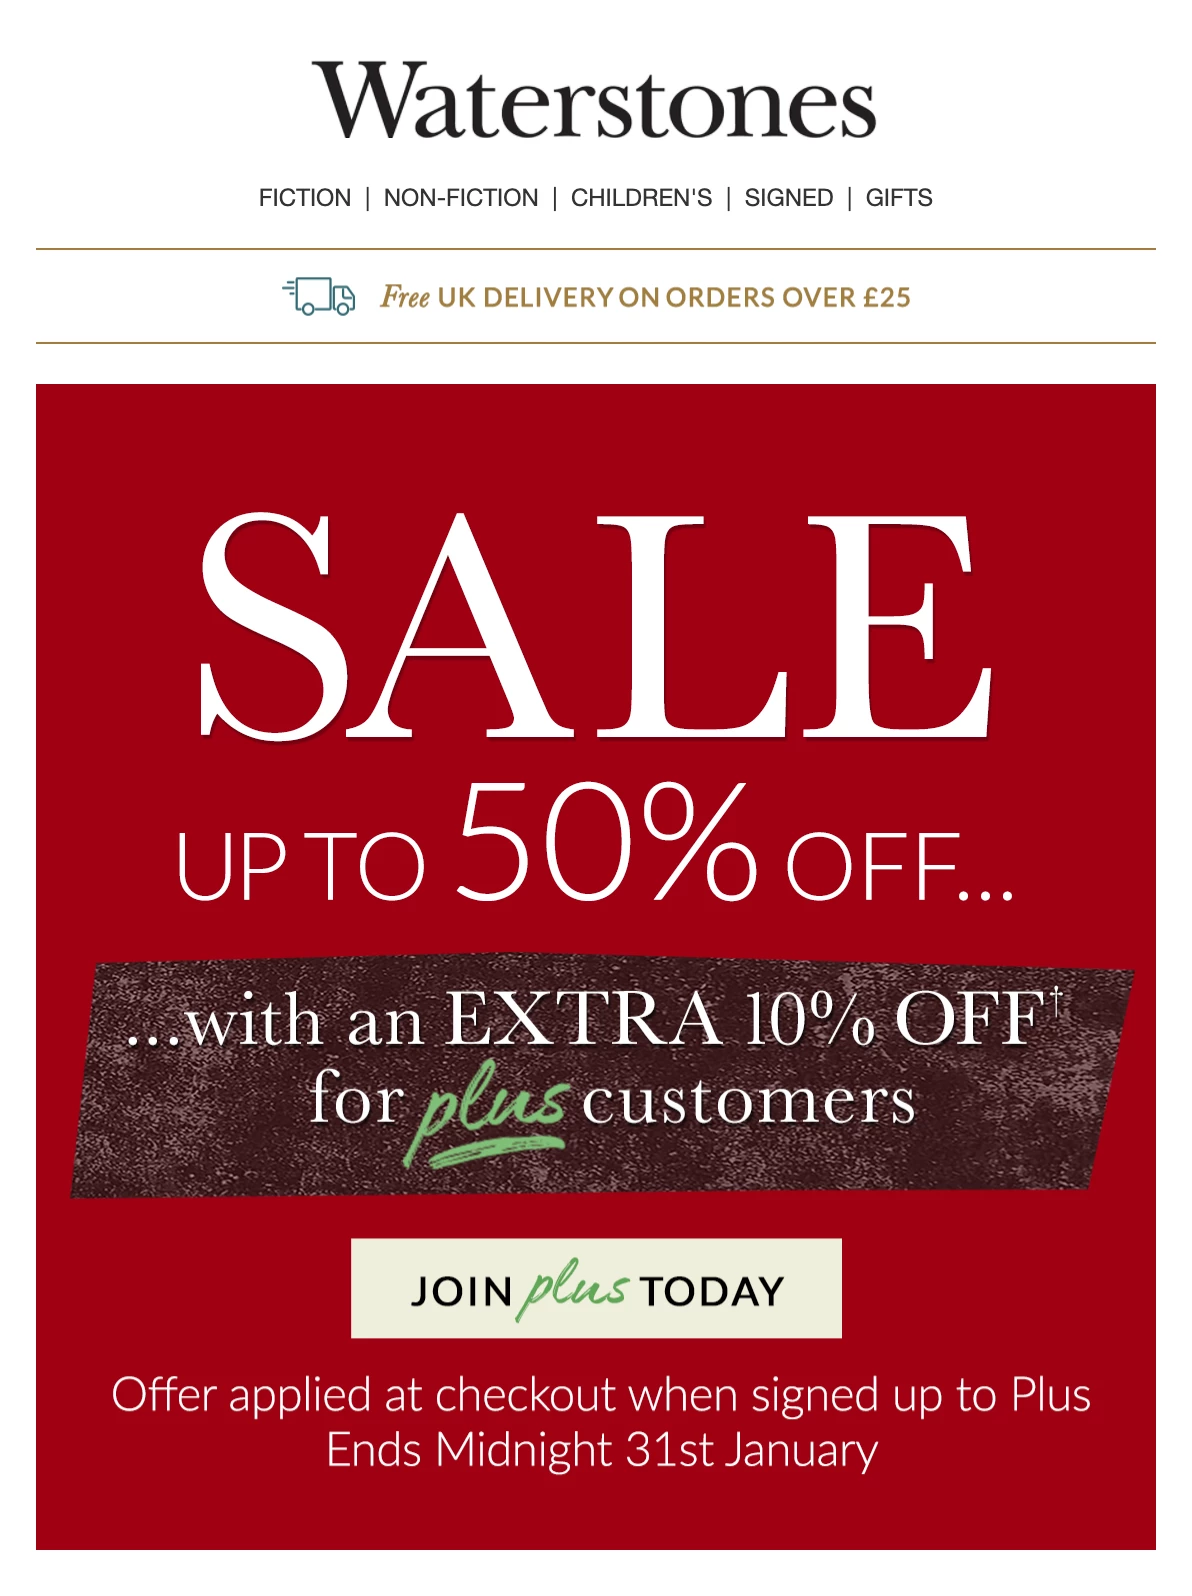 Waterstones 50% sale email until 31st January